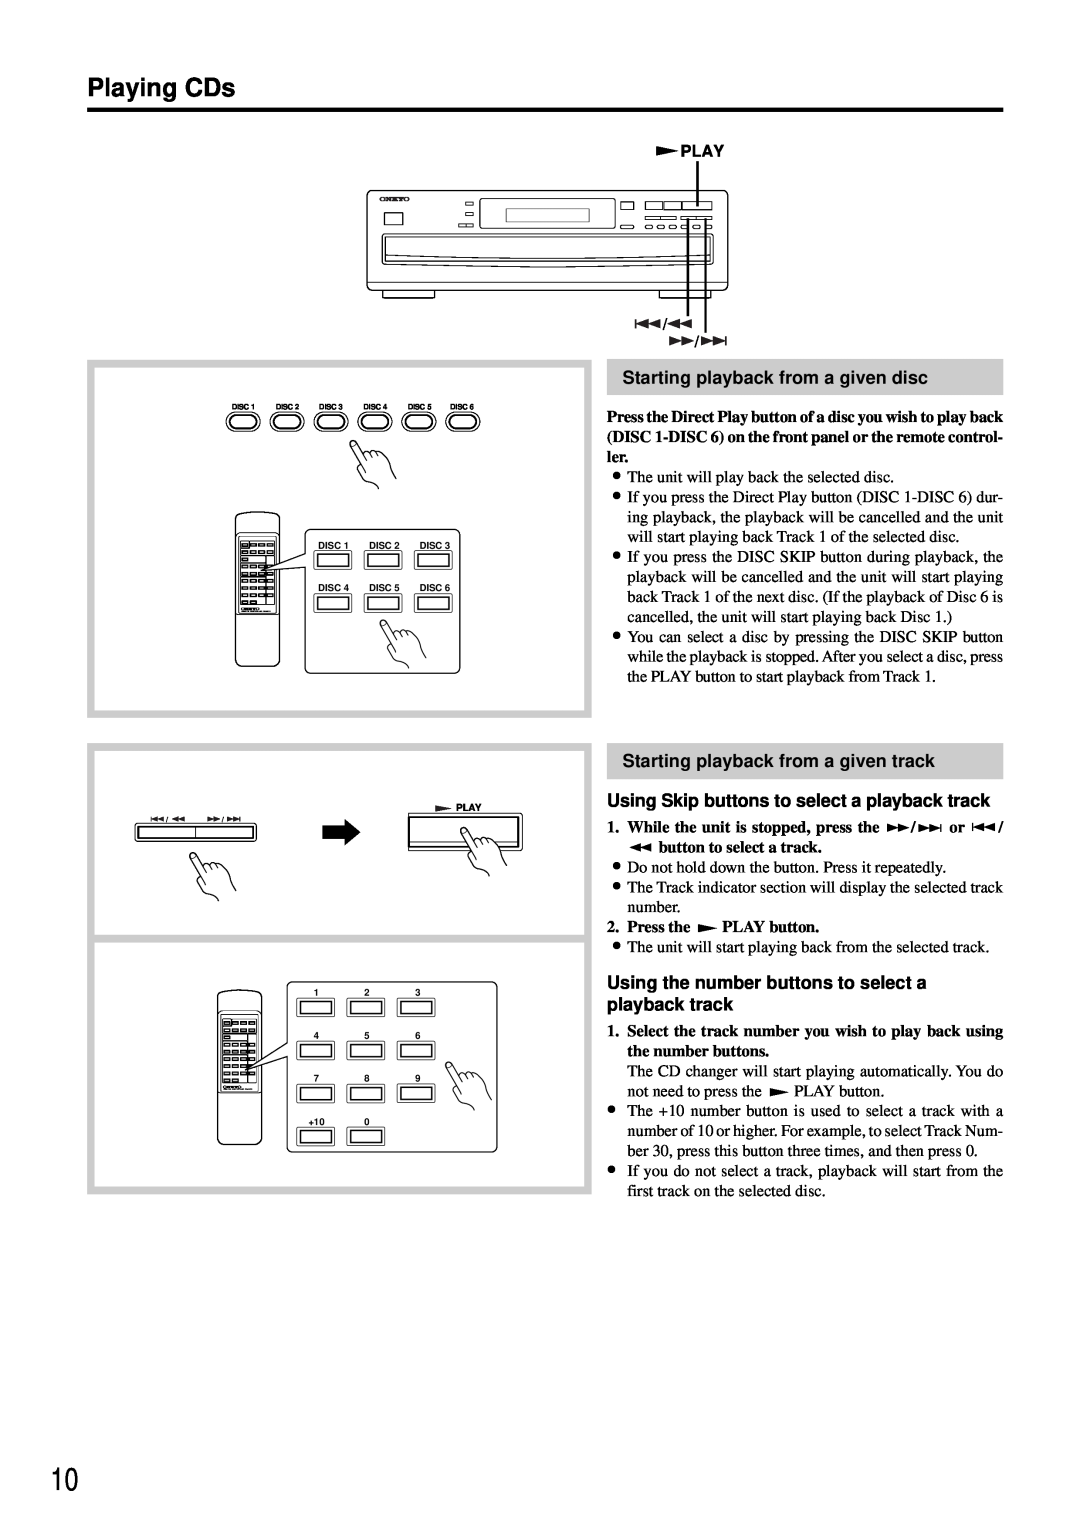 Onkyo DX-C380 instruction manual Playing CDs, Starting playback from a given disc, Starting playback from a given track 